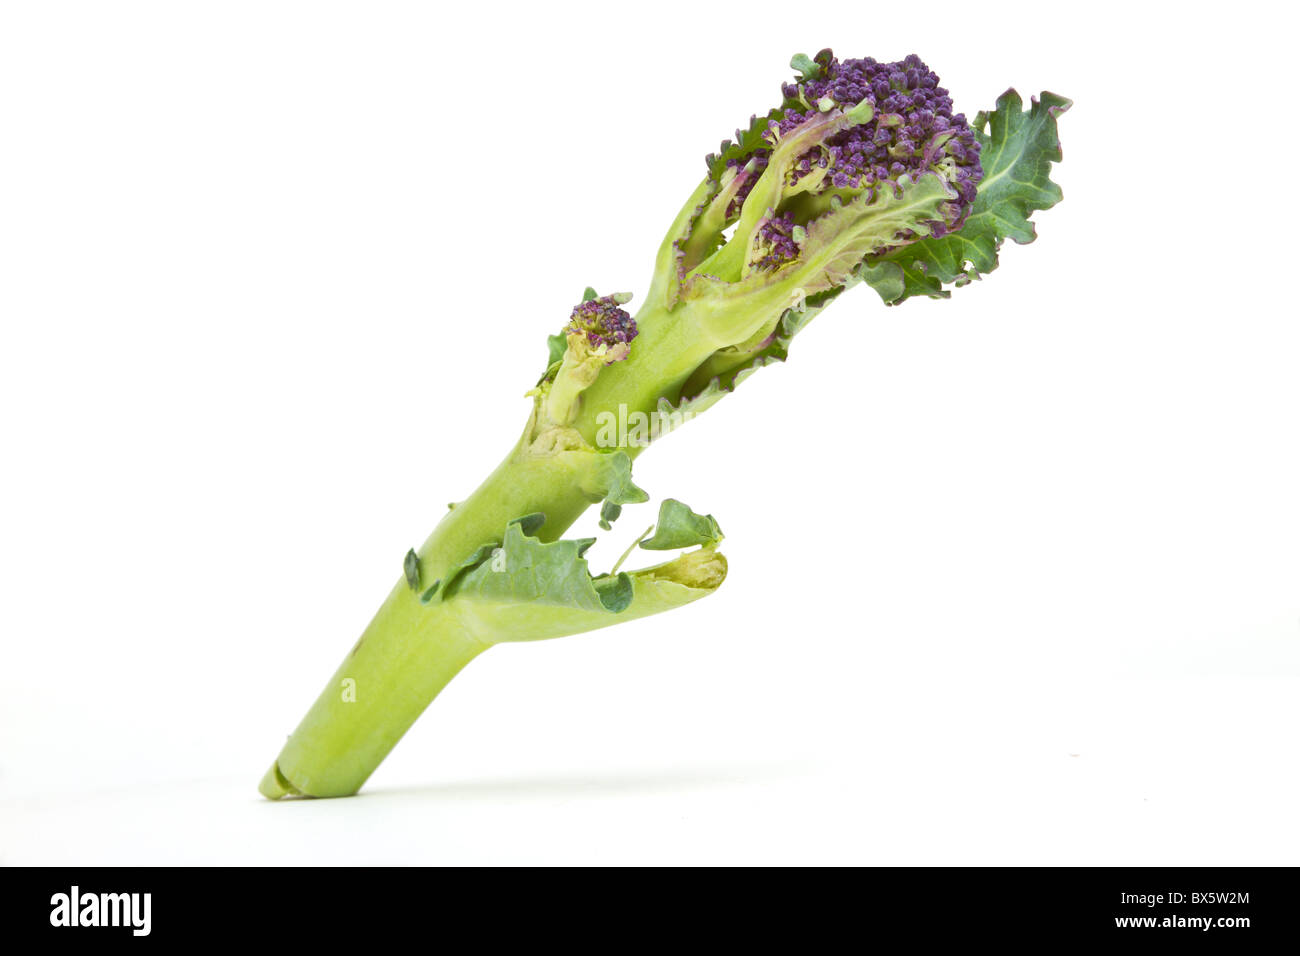 Abstract Purple Sprouting Broccoli from low perspective isolated on white. Stock Photo